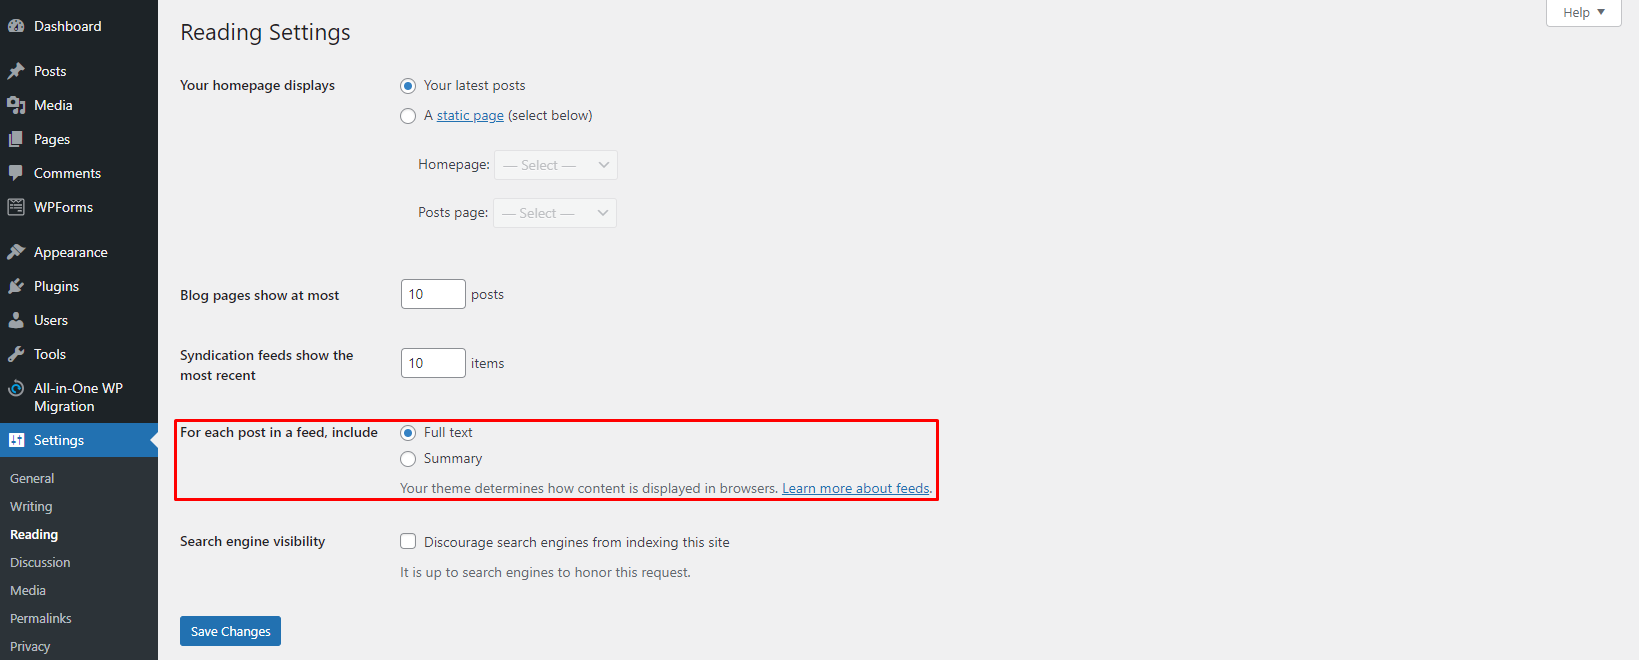 The Settings page on the WordPress dashboard, showing where to select full text or summary when previewing a blog post